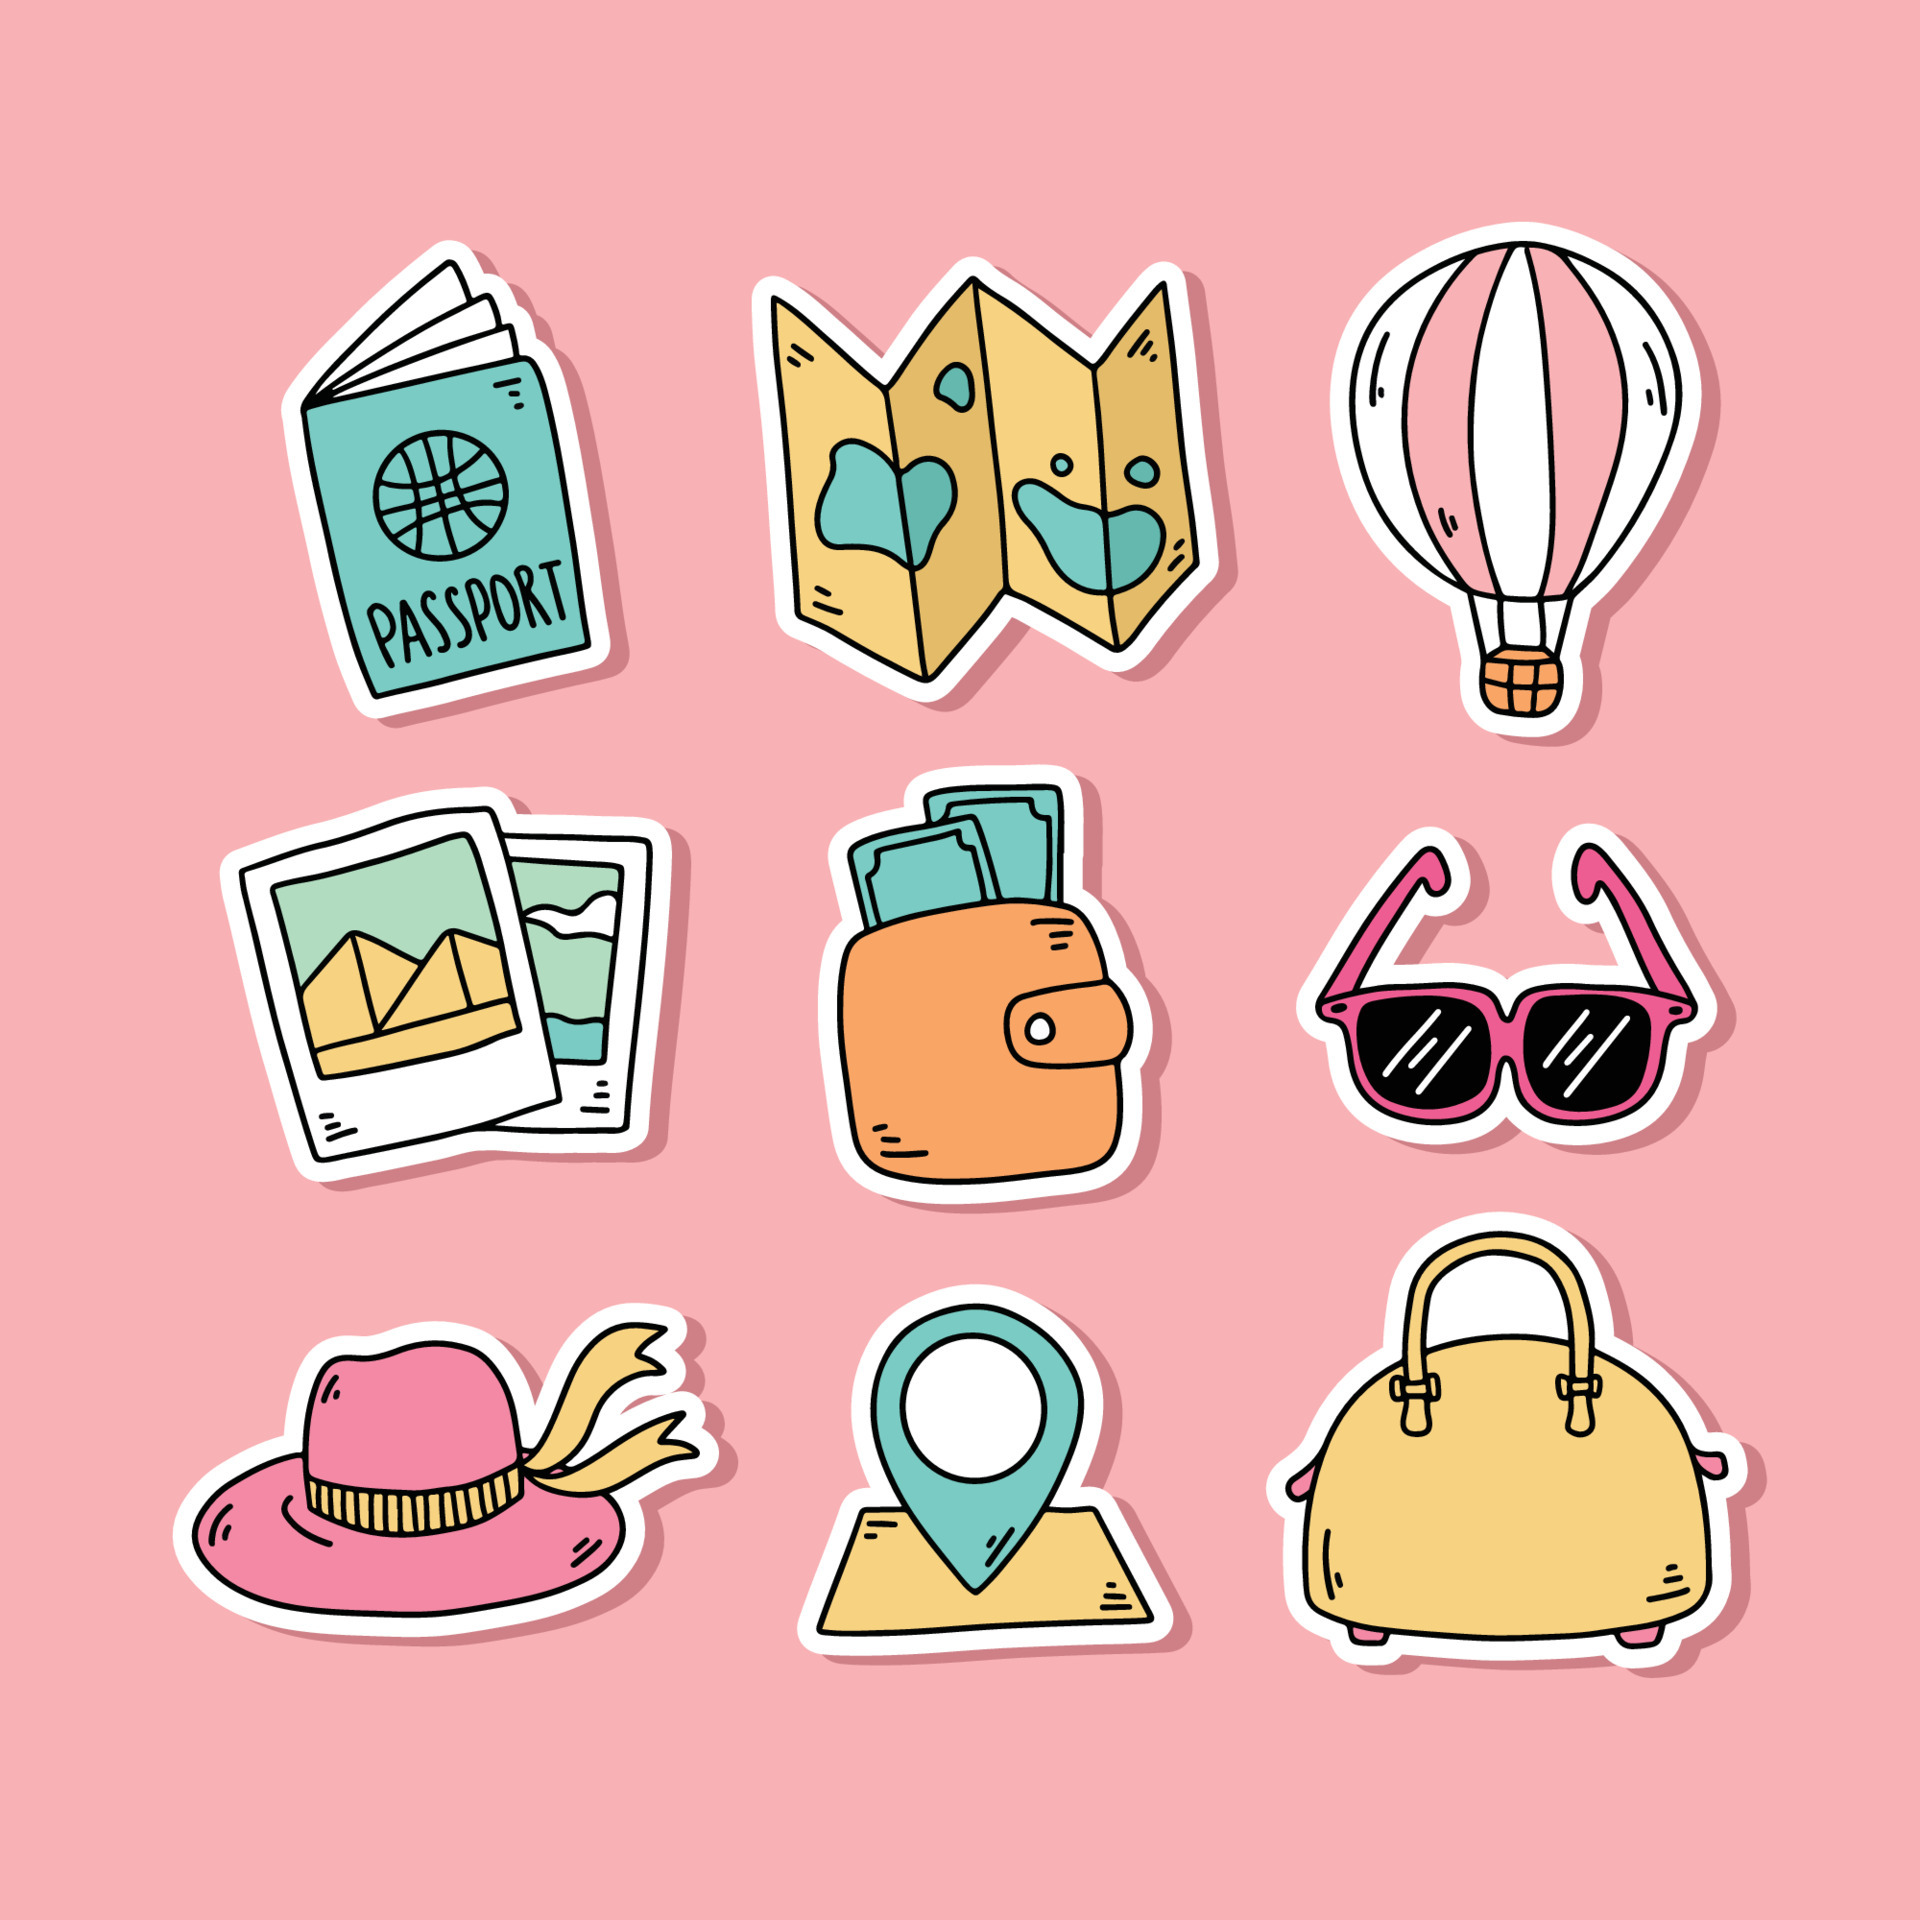 https://static.vecteezy.com/system/resources/previews/007/118/569/original/cute-hand-drawn-travel-elements-sticker-collection-free-vector.jpg